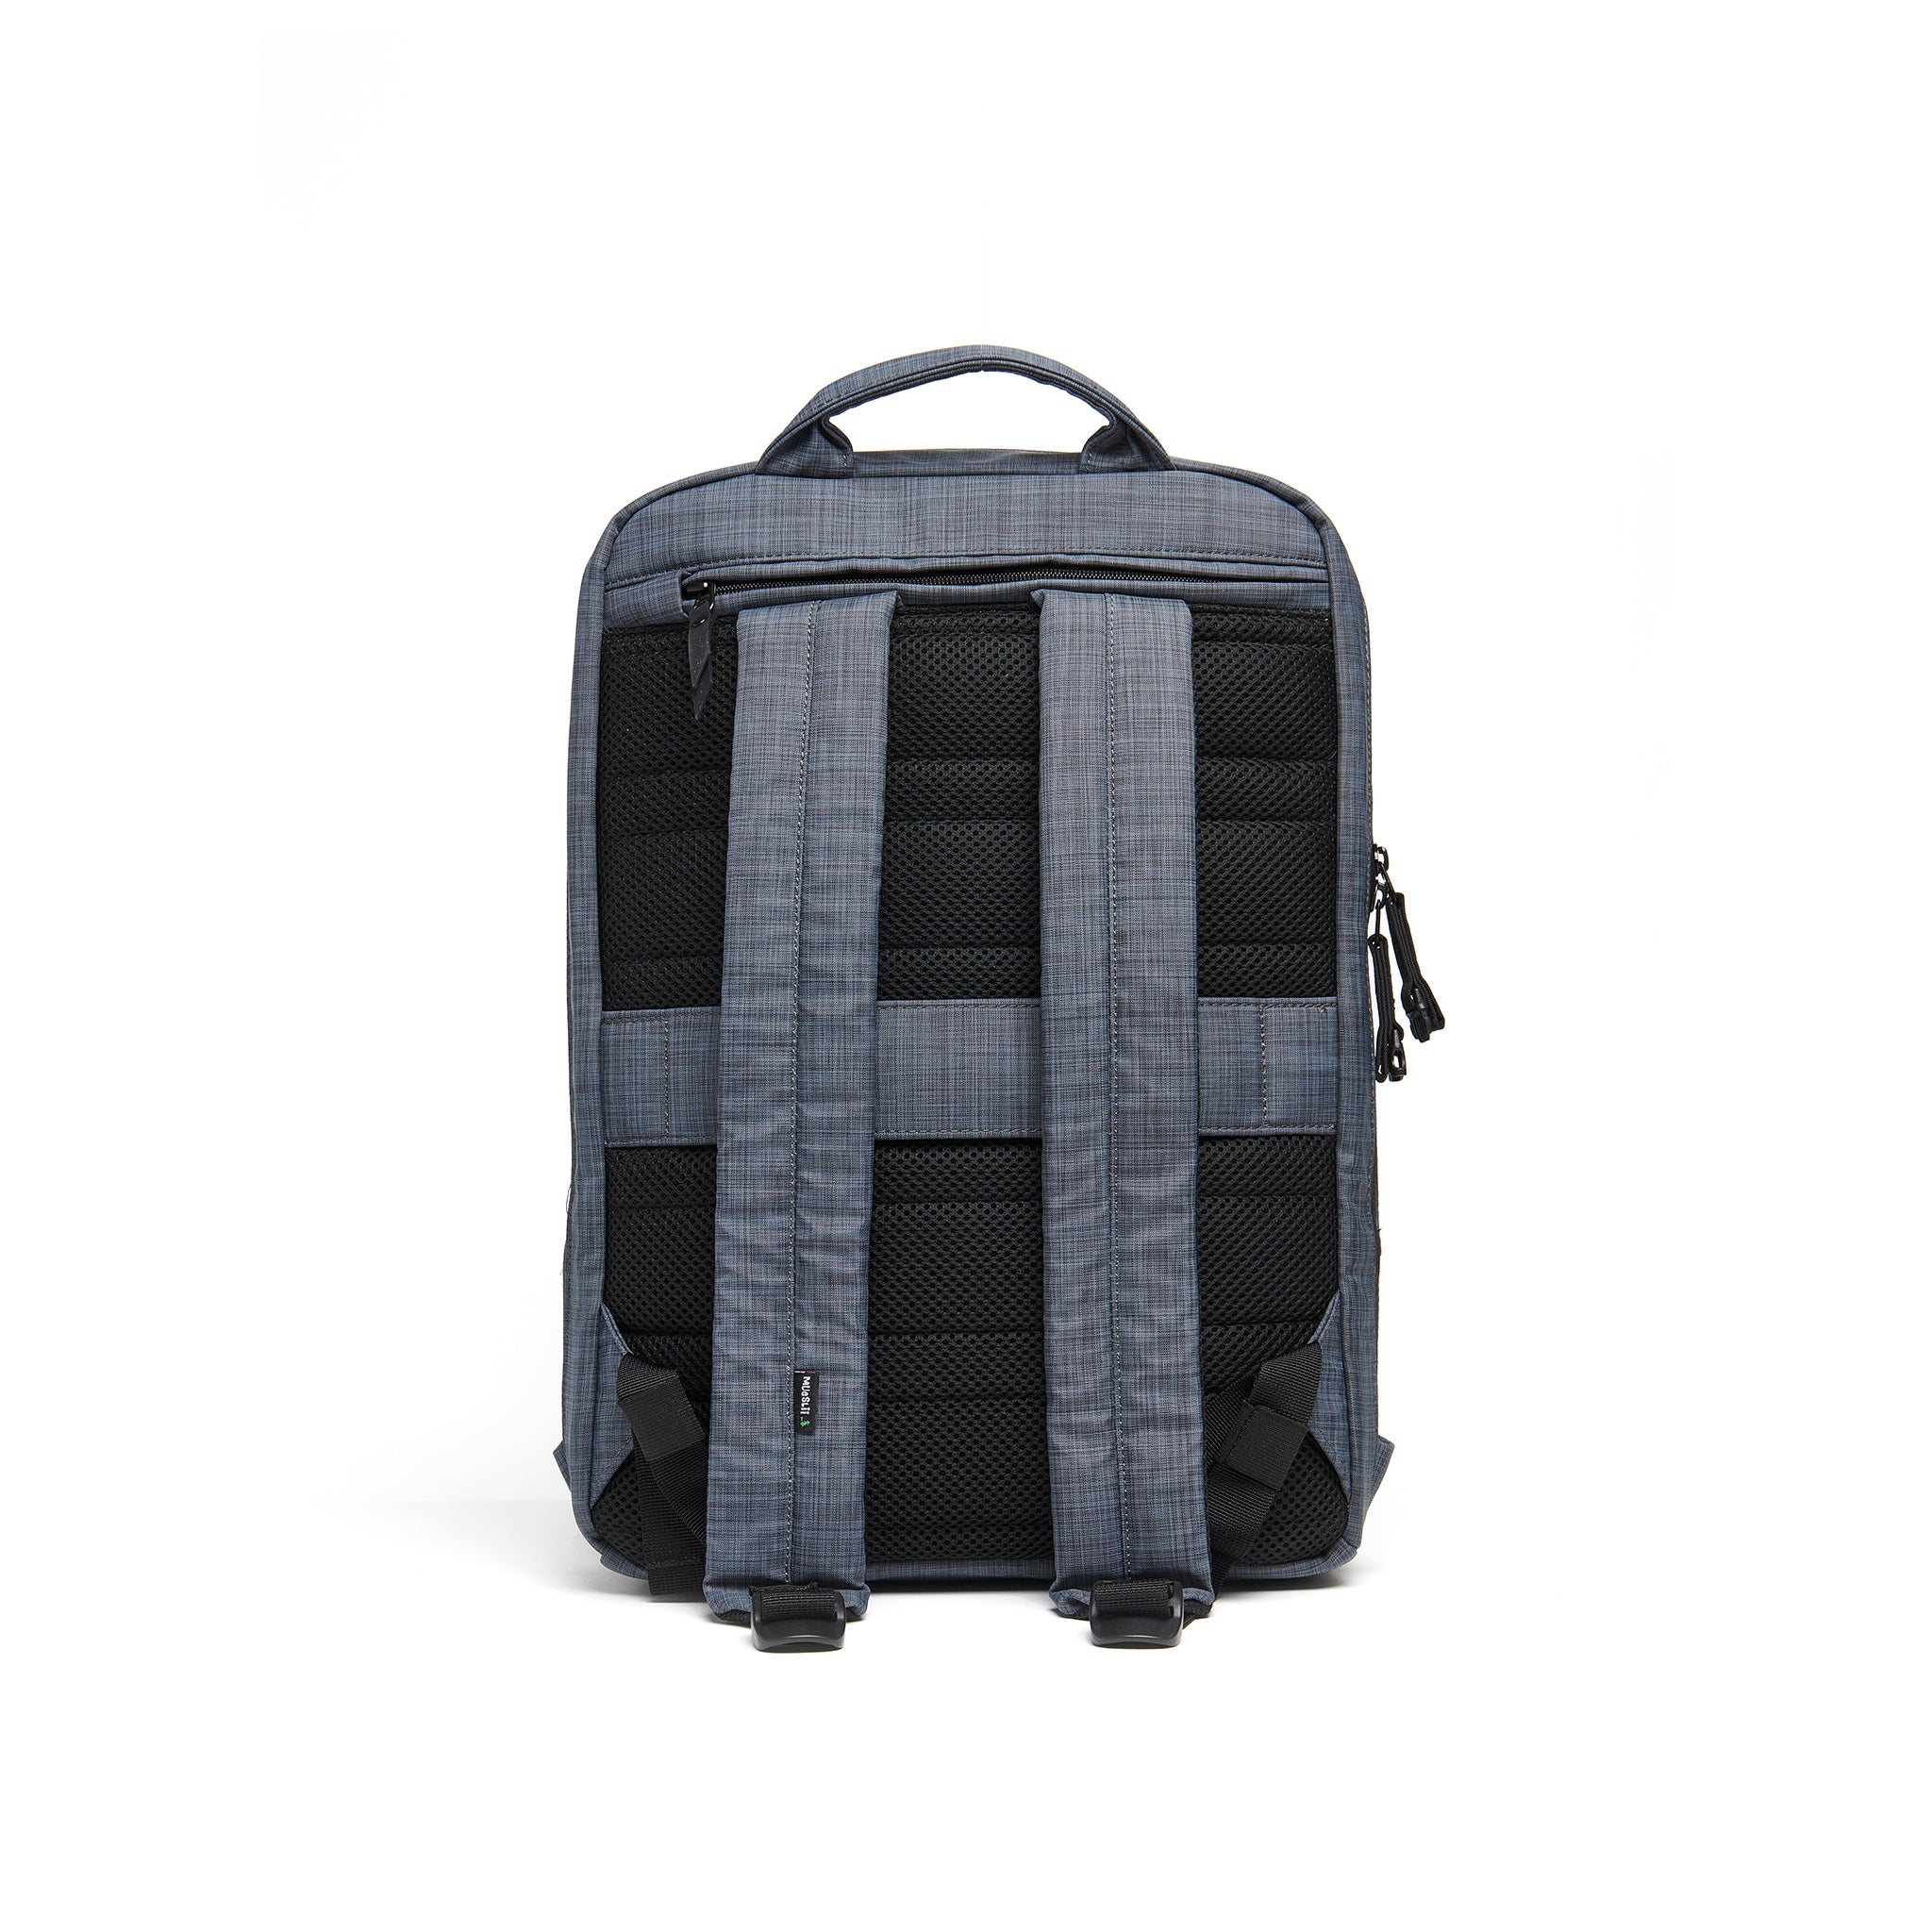 Mueslii daily backpack, made of  water resistant canvas nylon, with a laptop compartment, color slate grey, back view.